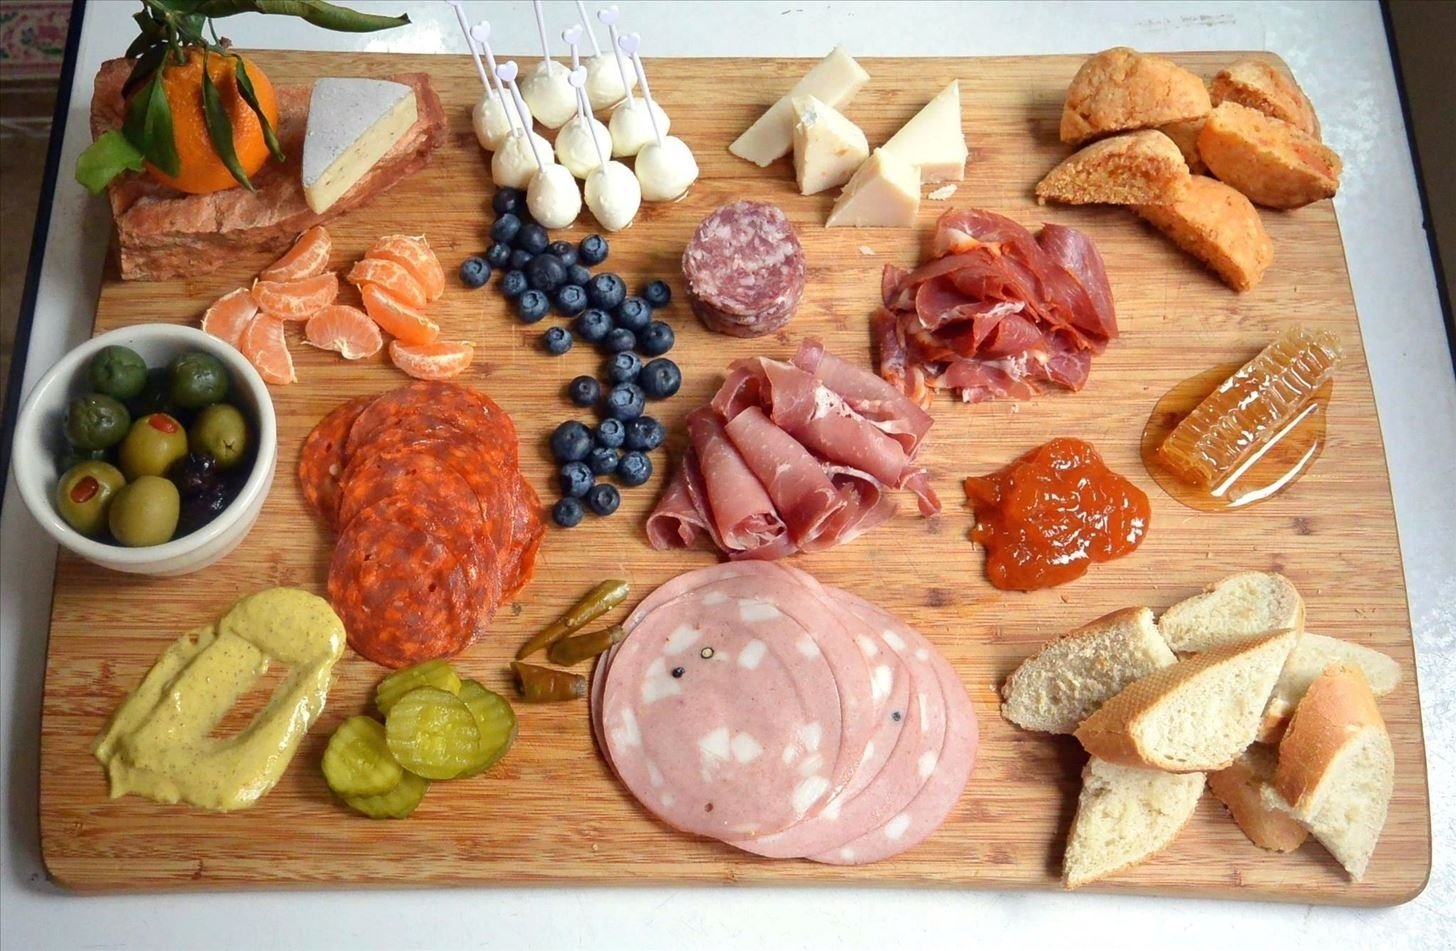 10 Unique Meat And Cheese Tray Ideas the ultimate guide to making a kickass meat cheese plate food 2023